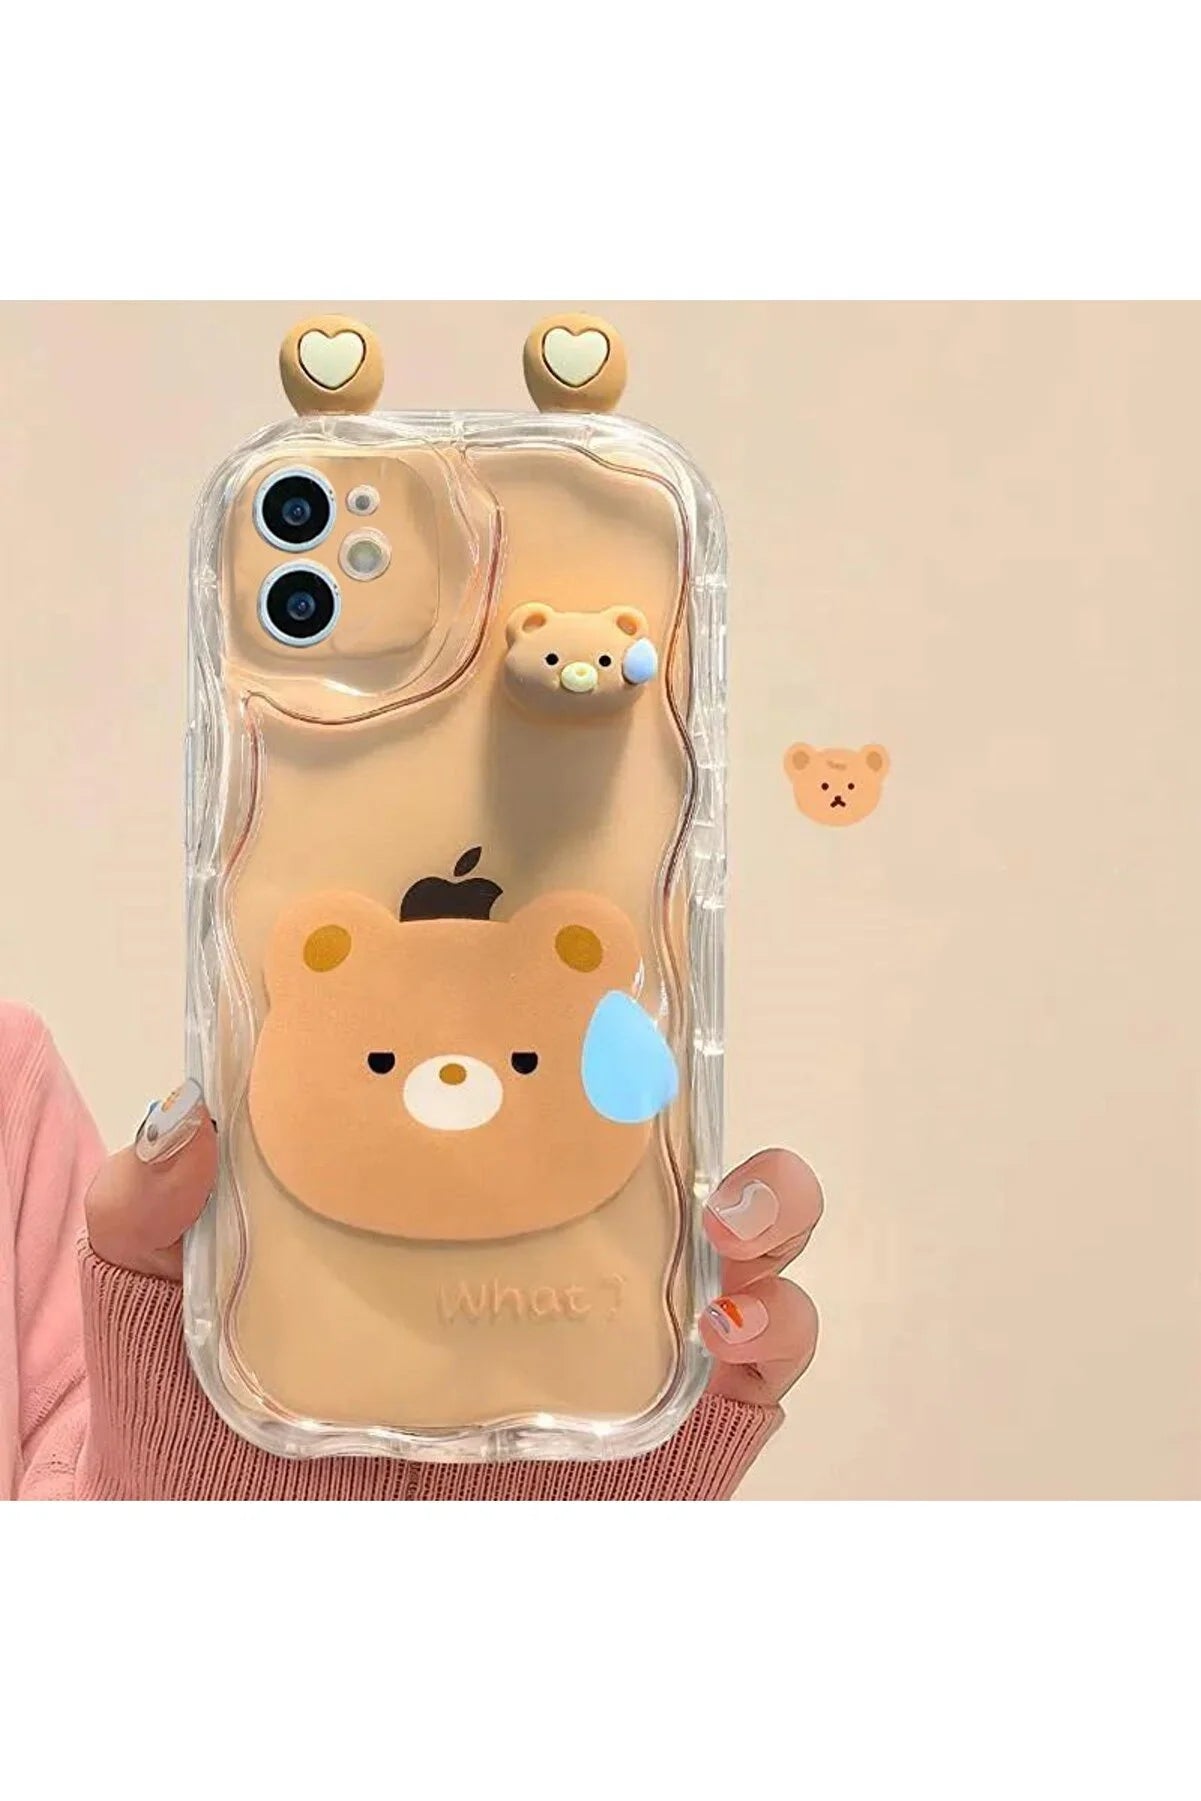 iPhone 11 Cute Cow Print Fashion Case - Slim, Lightweight & Protective Transparent TPU Rubber Case with Camera Protection, Compatible with Apple Models